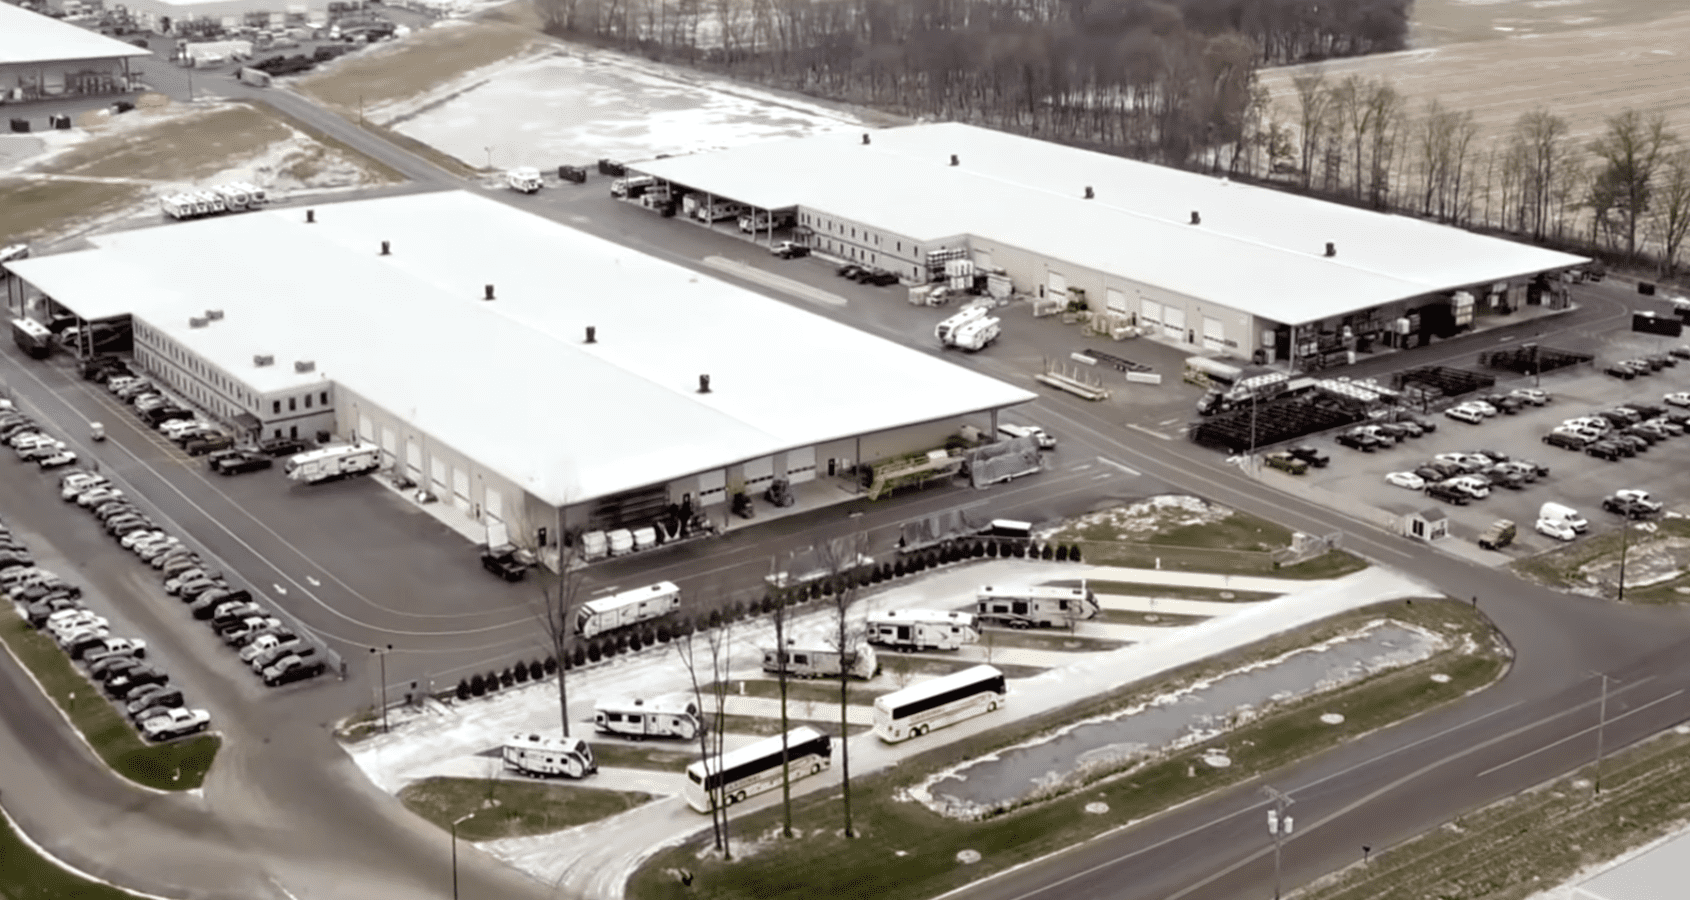 Aerial photo of the Grand Design RV factory